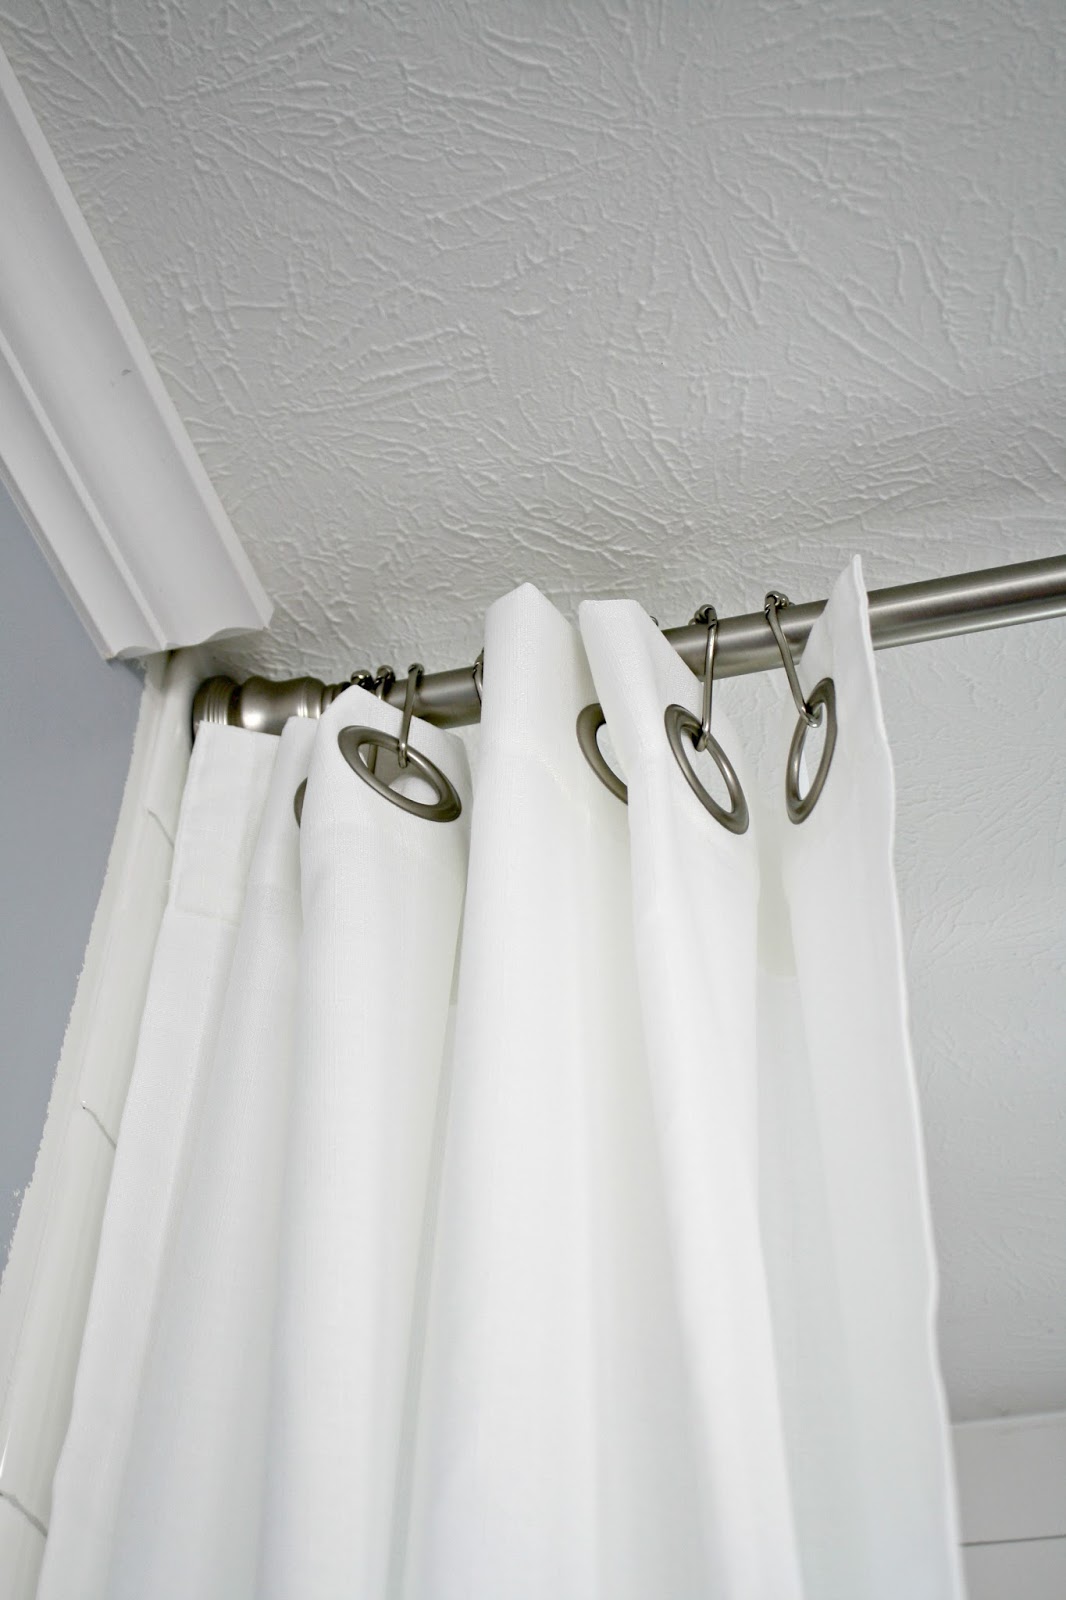 How To Hang Double Shower Curtains For, Shower Curtains That Split In The Middle